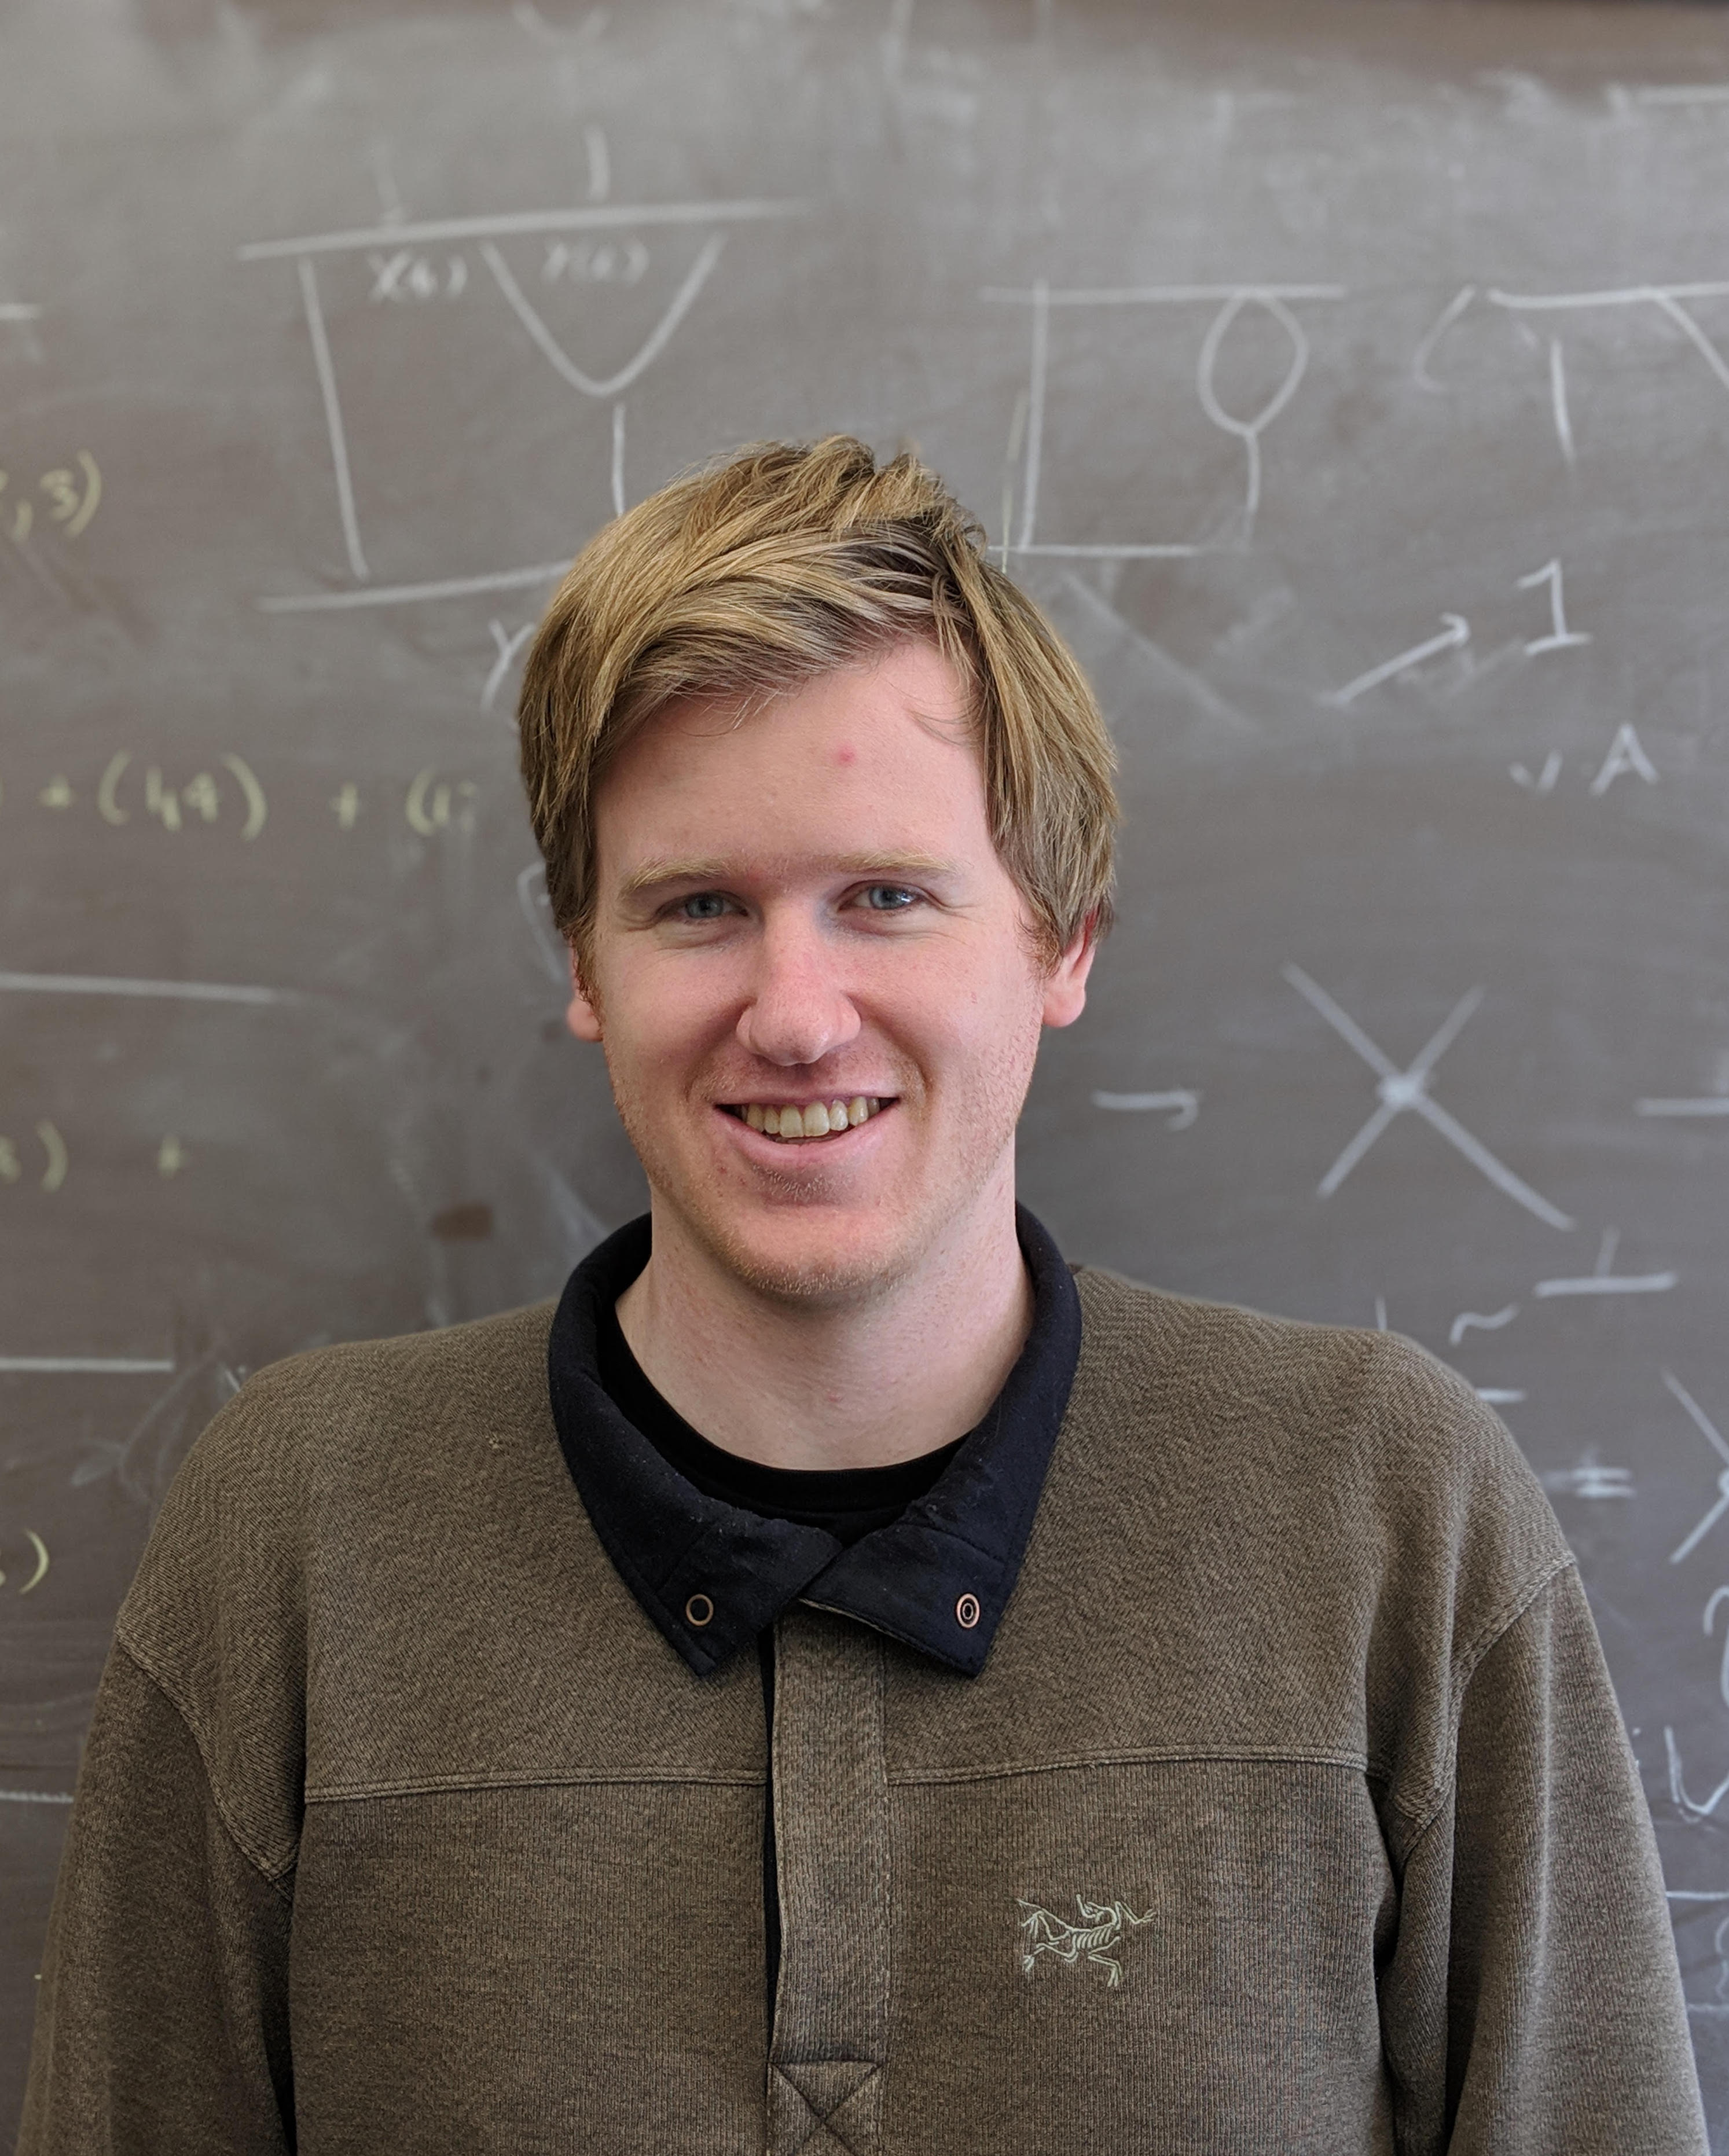 "A photograph of Ian Moult, a professor of physics in the UC Irvine Department of Physics and Astronomy."